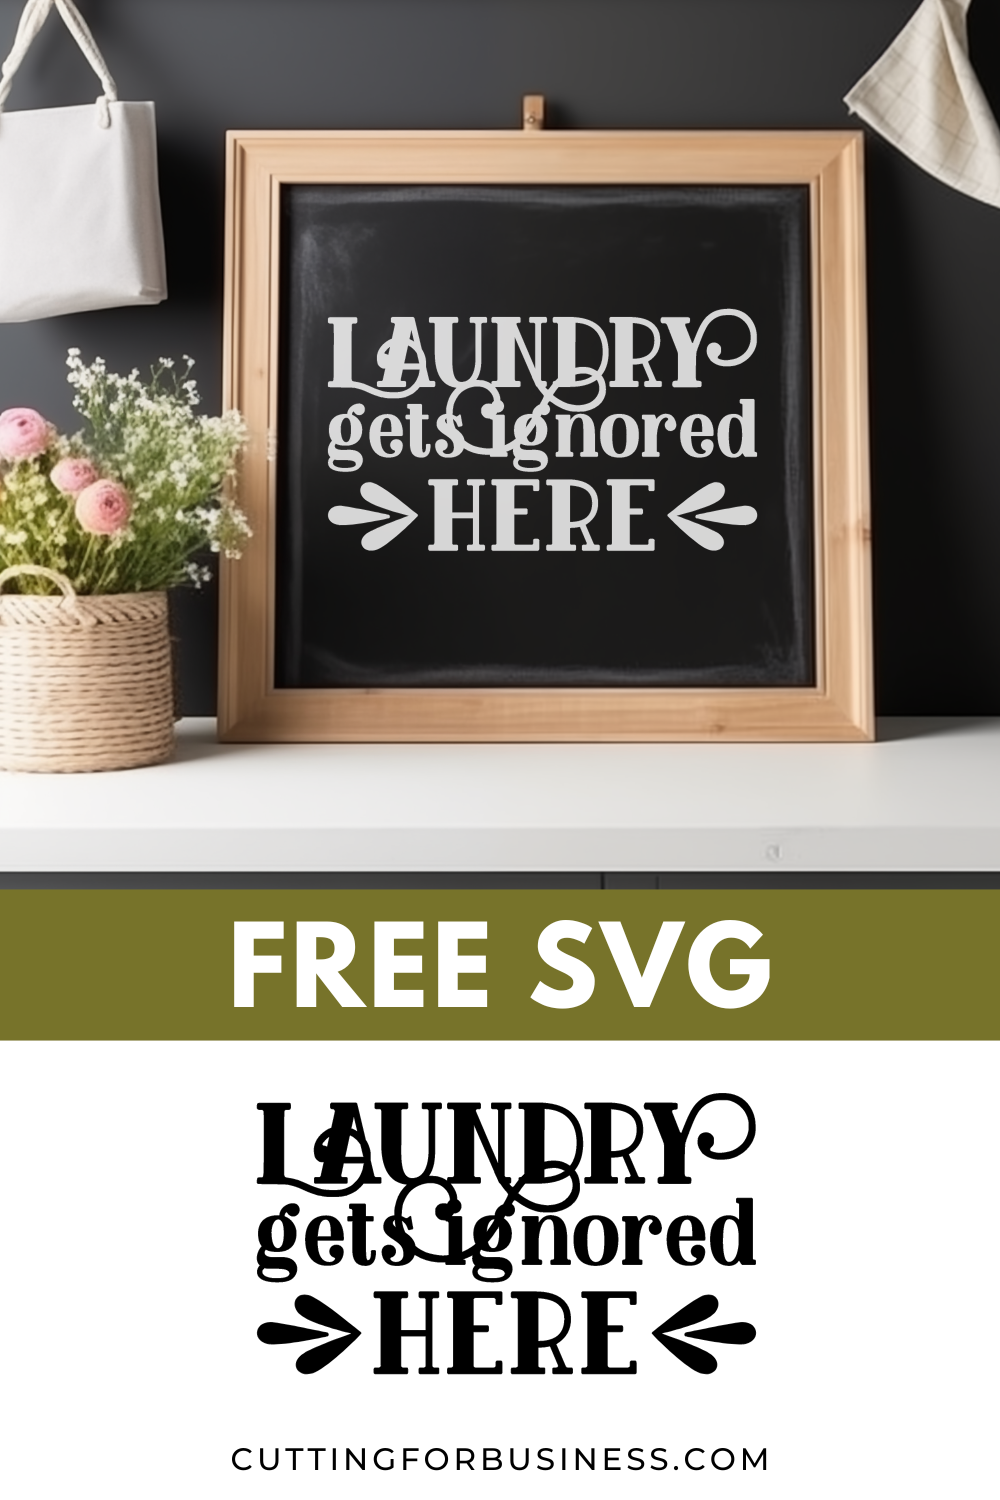 Free Laundry Gets Ignored Here SVG - cuttingforbusiness.com